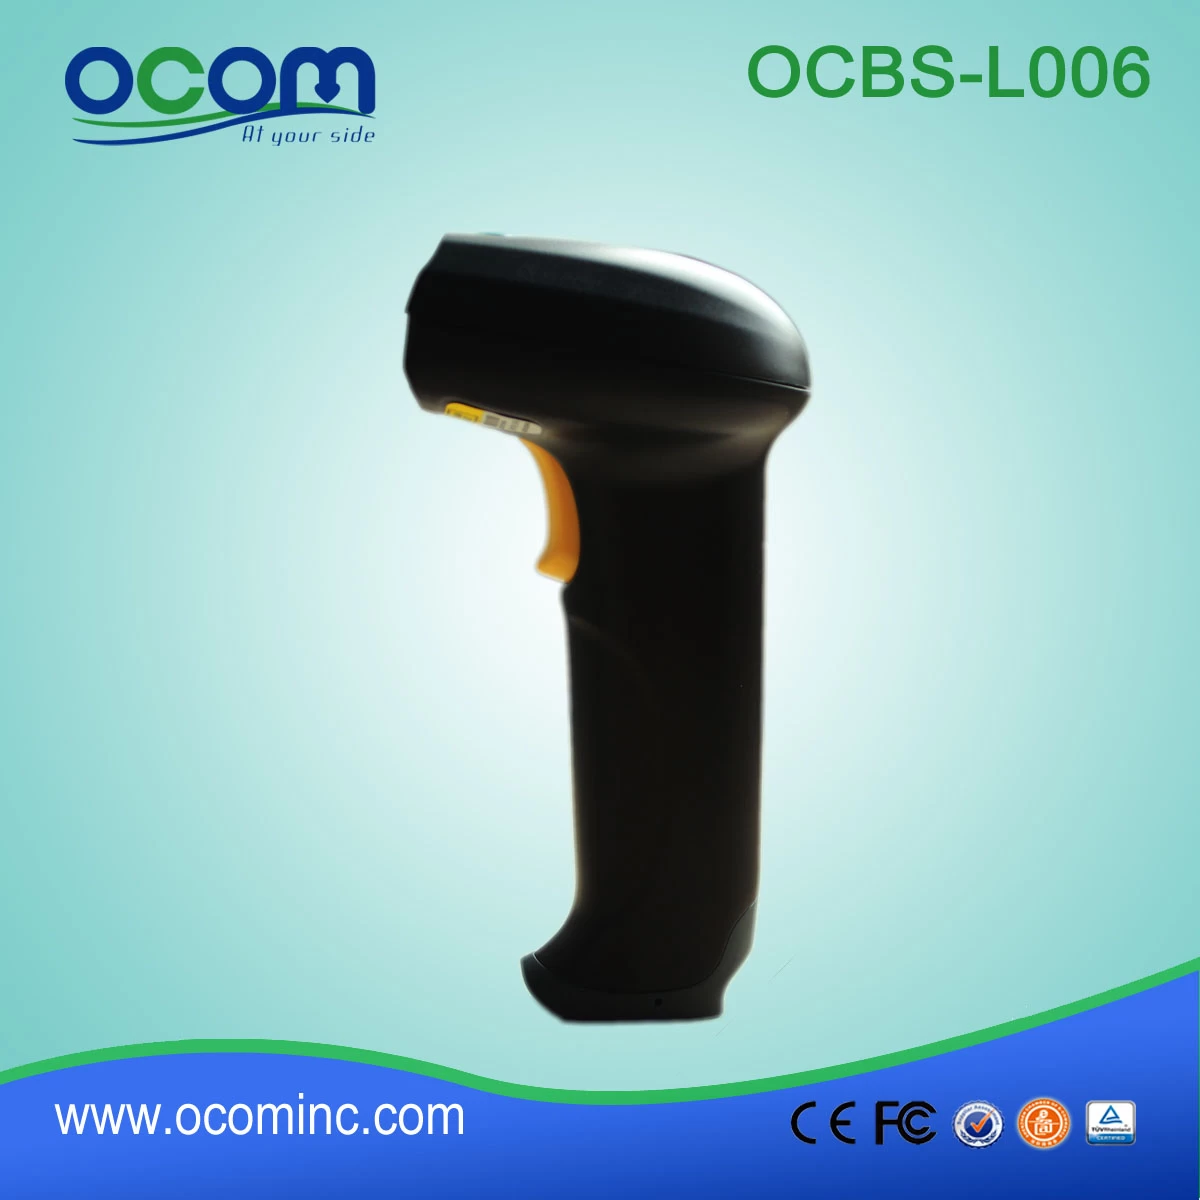 China made hot selling handheld laser barcode scanner-OCBS-L006